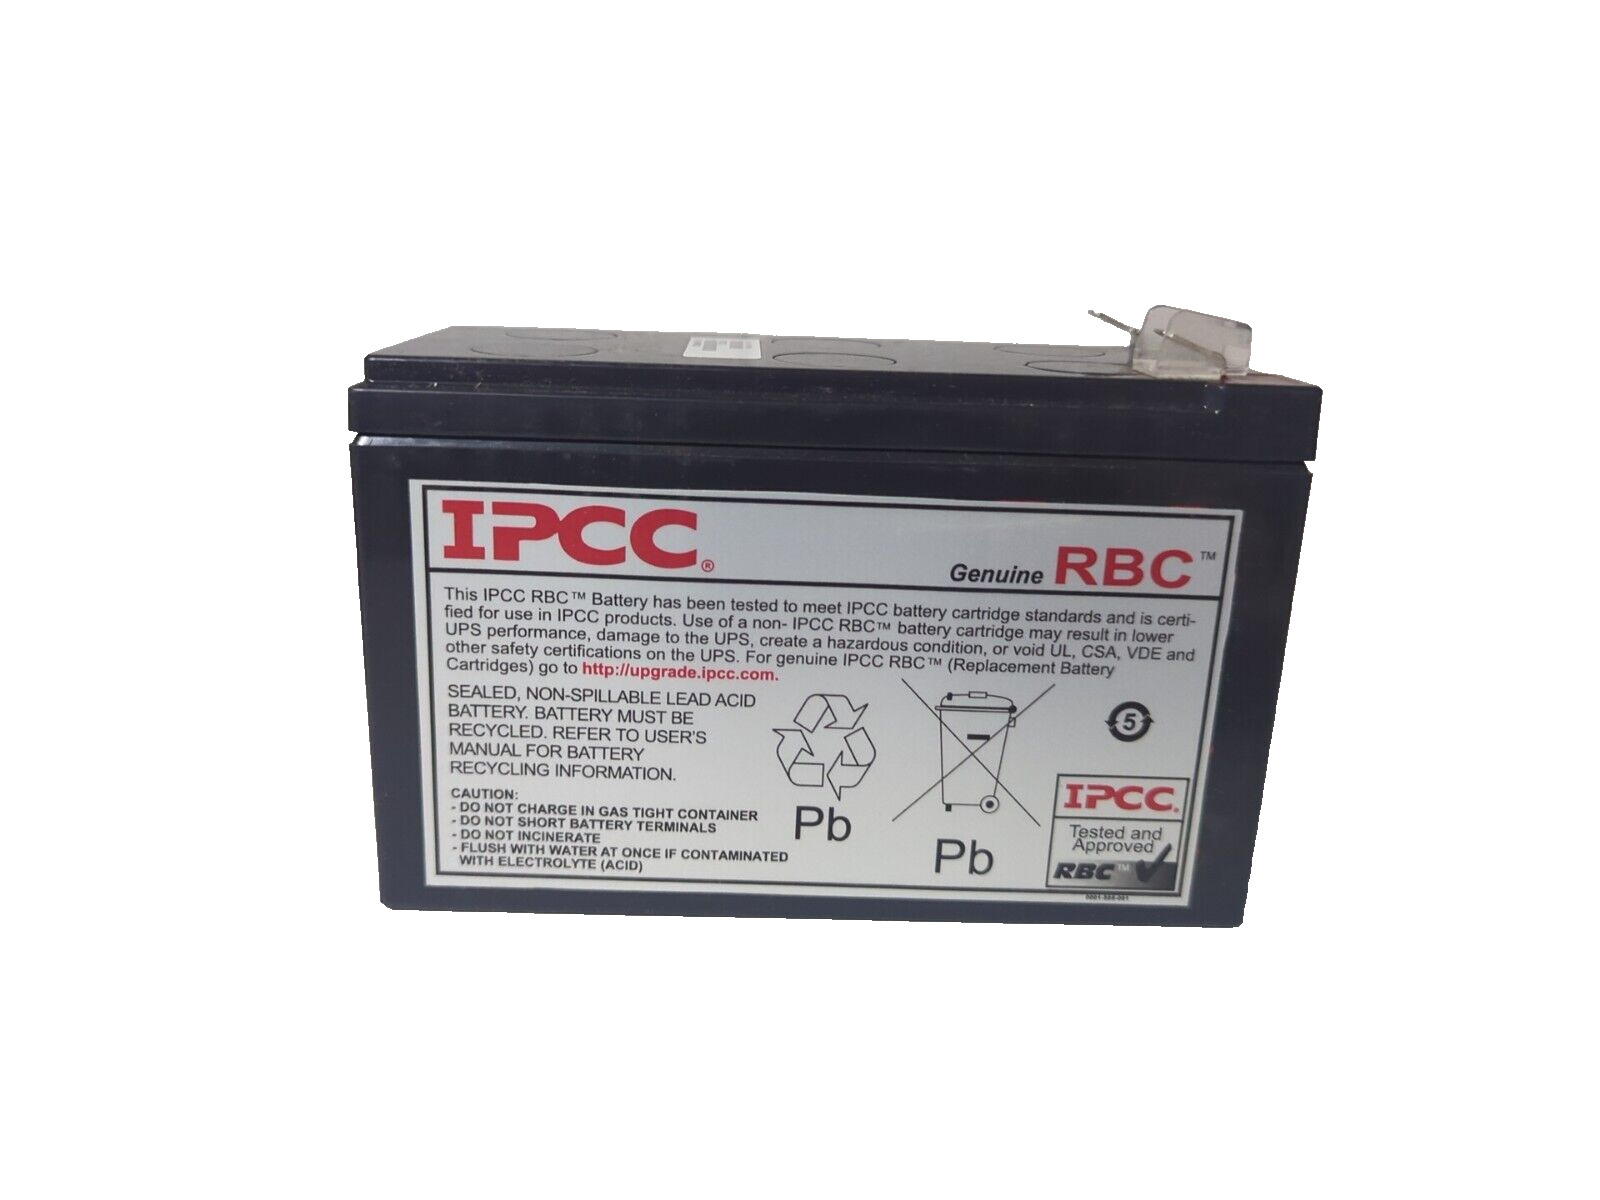 APC UPS Battery Replacement RBC17 for APC Models BE650G1, BE750G, BR700G, BE850M